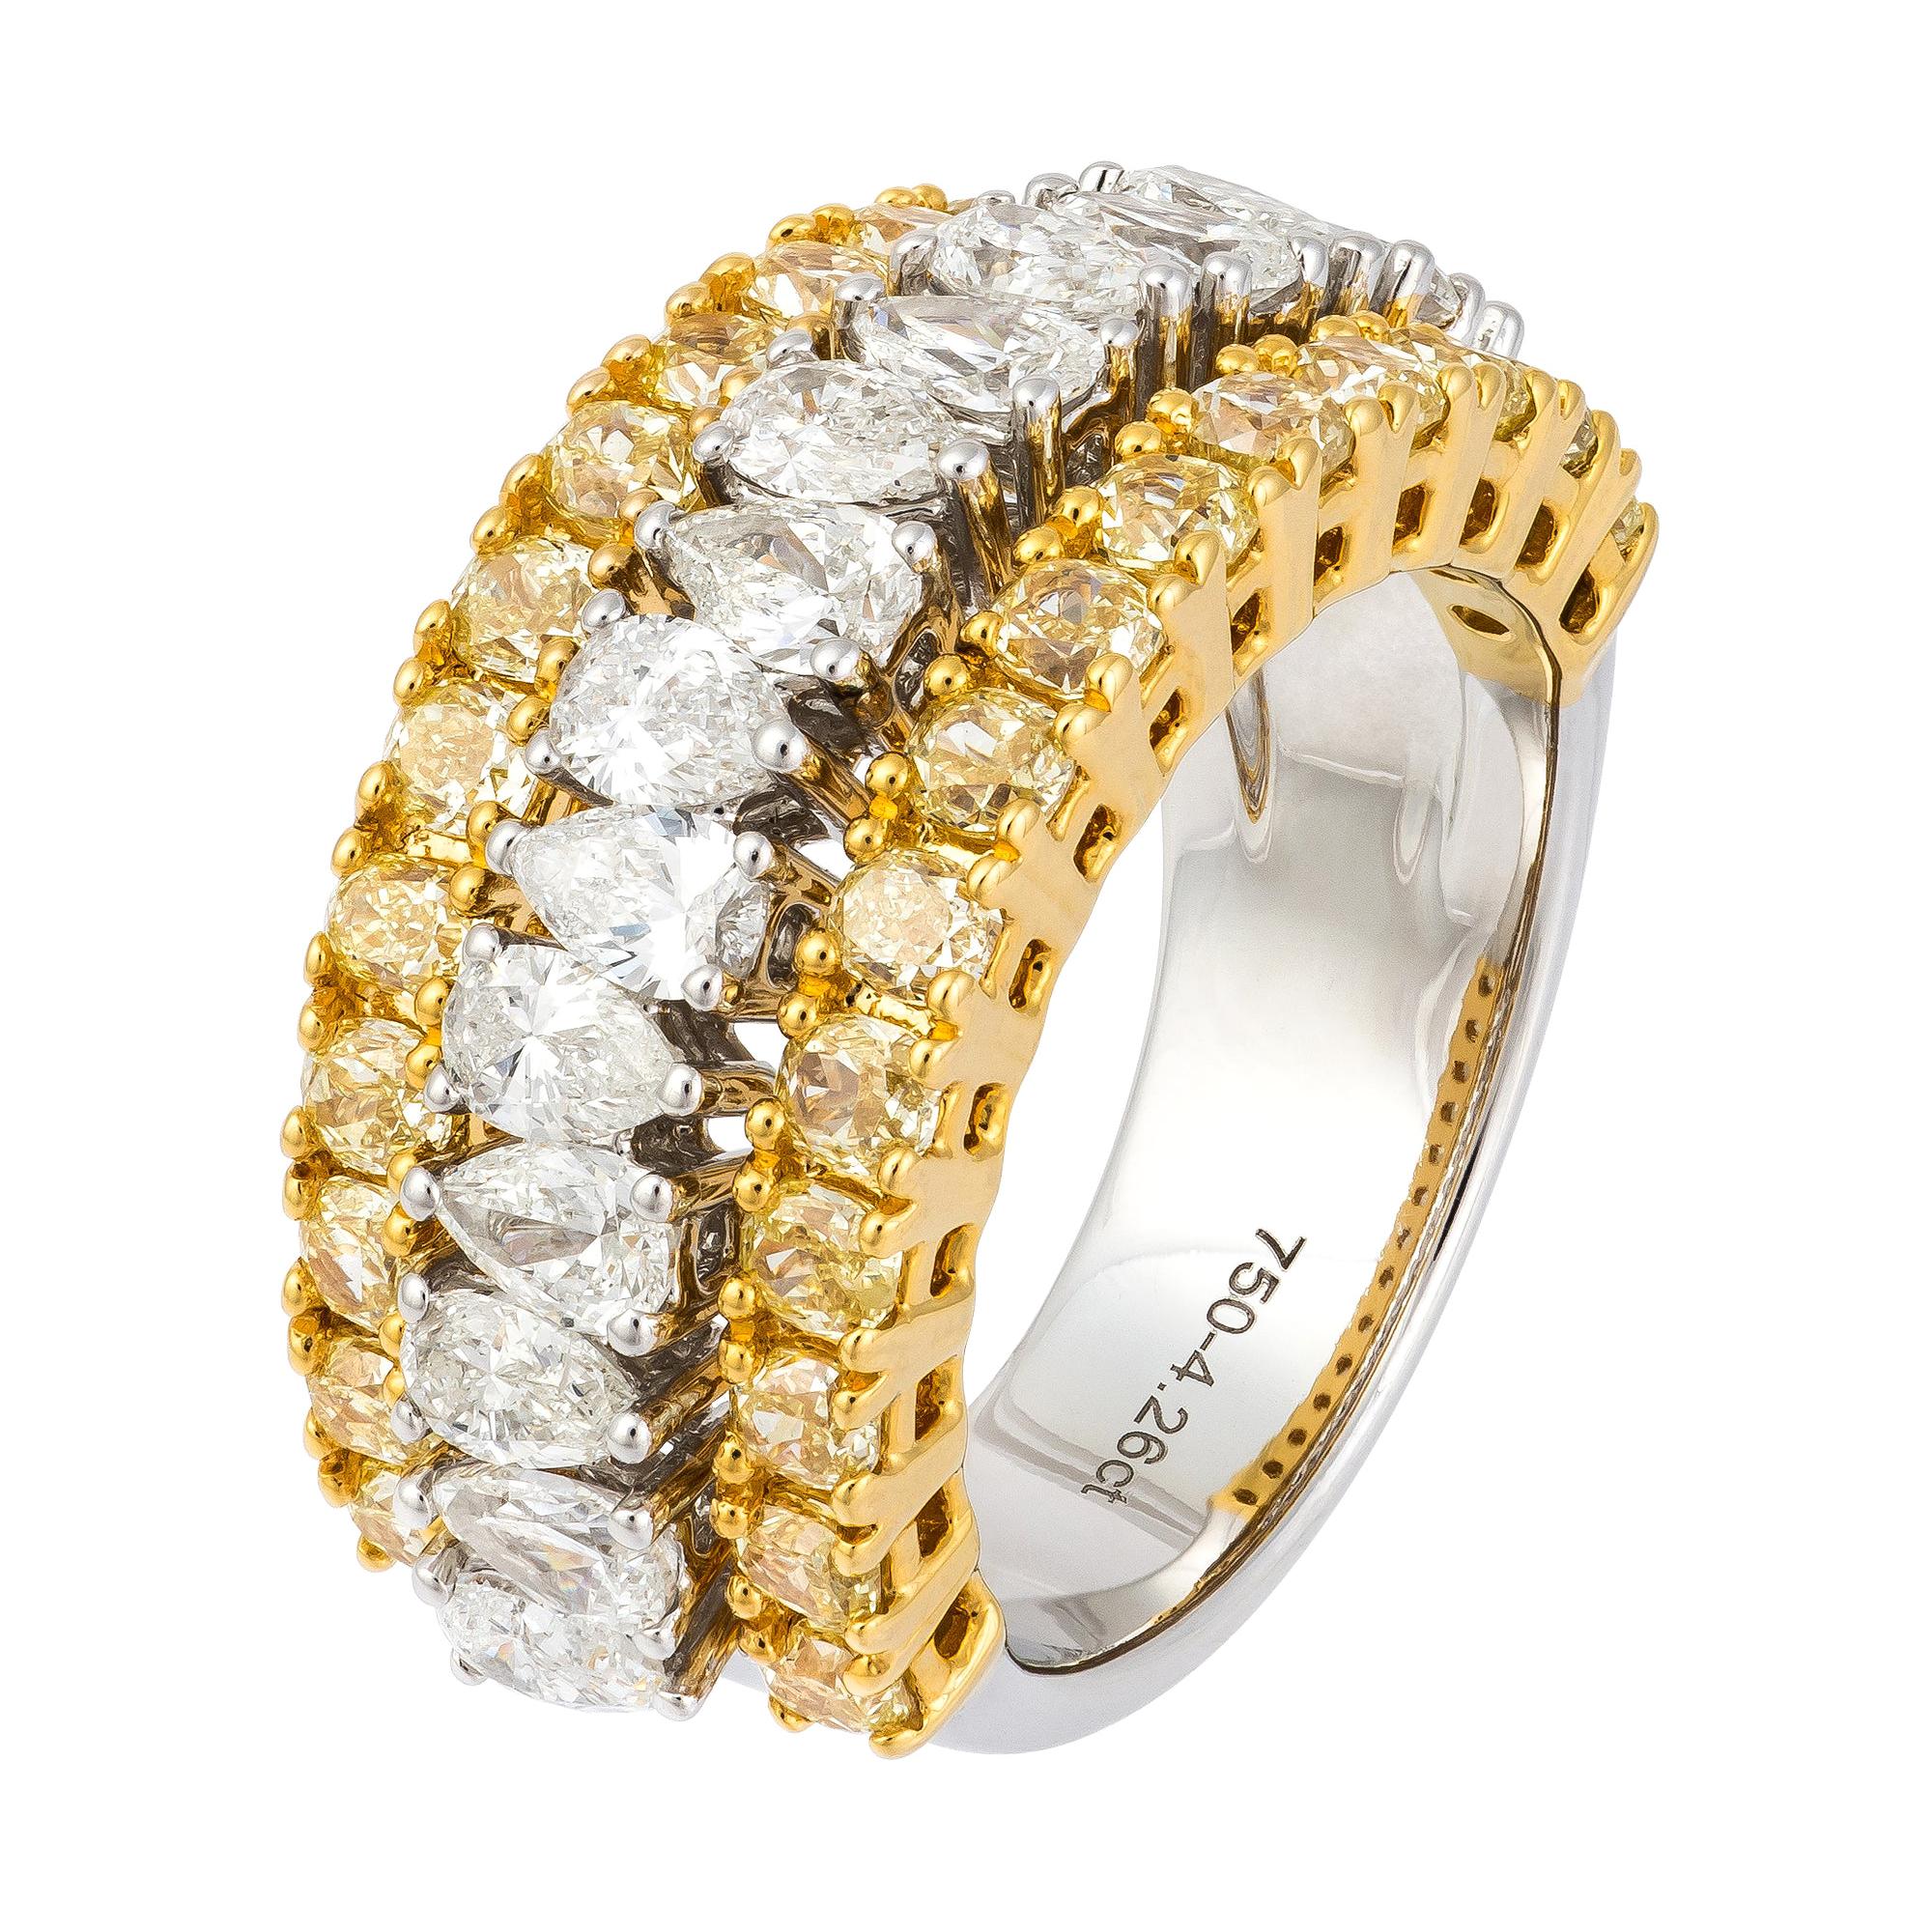 Investment Yellow White Diamond White Gold 18k Ring for Her For Sale